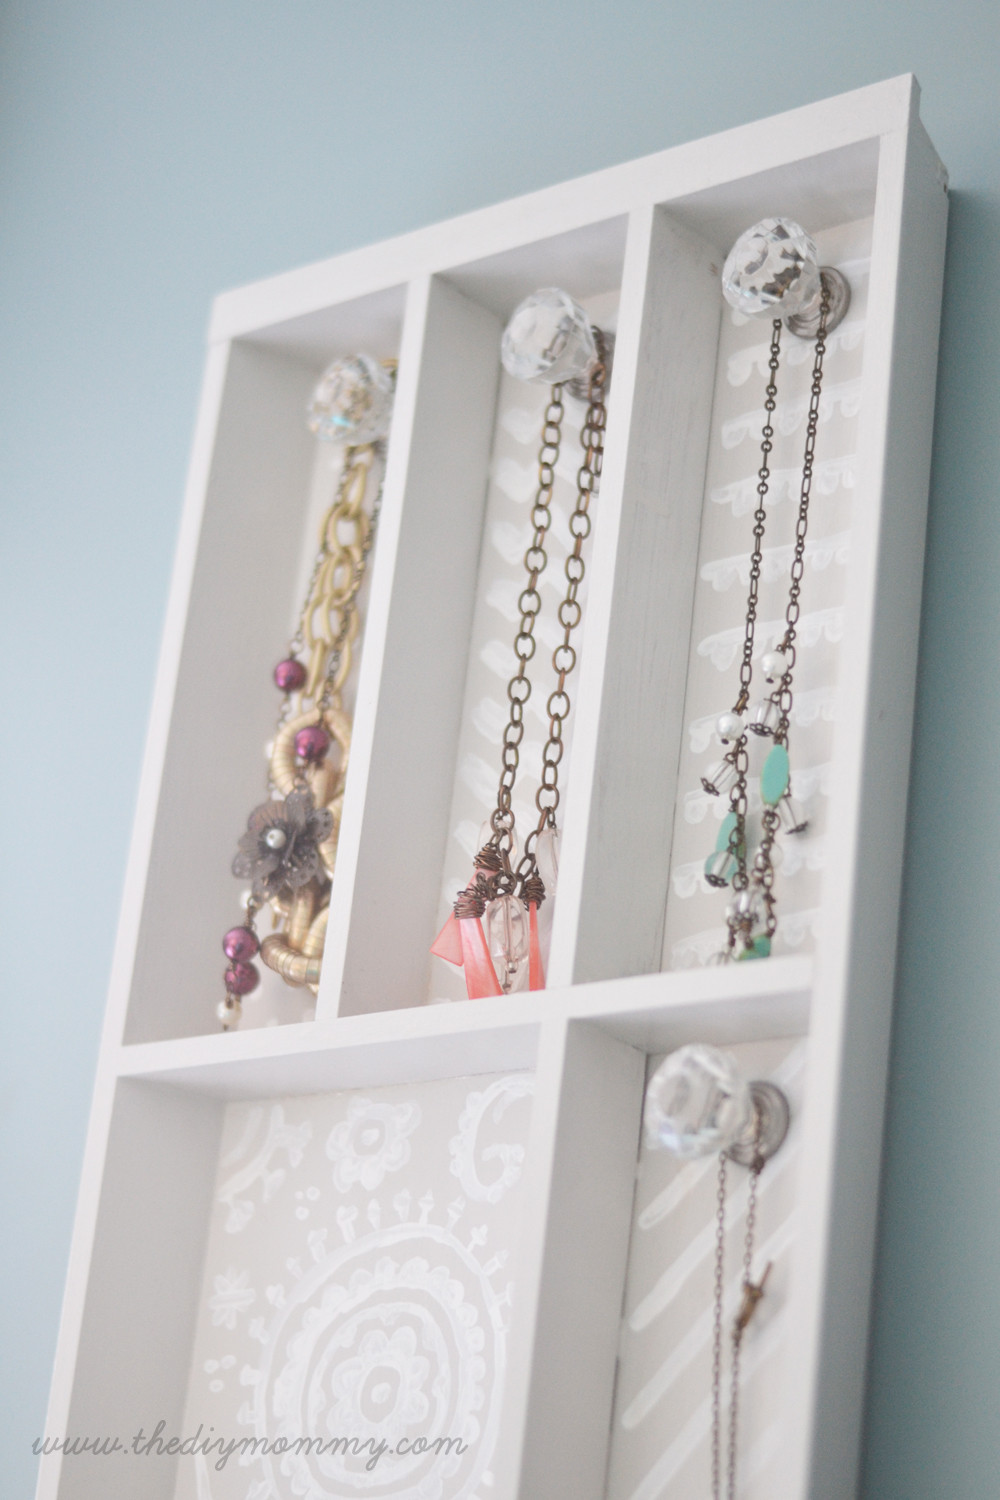 Necklace Holder Diy
 Make a Jewelry Holder from a Cutlery Tray